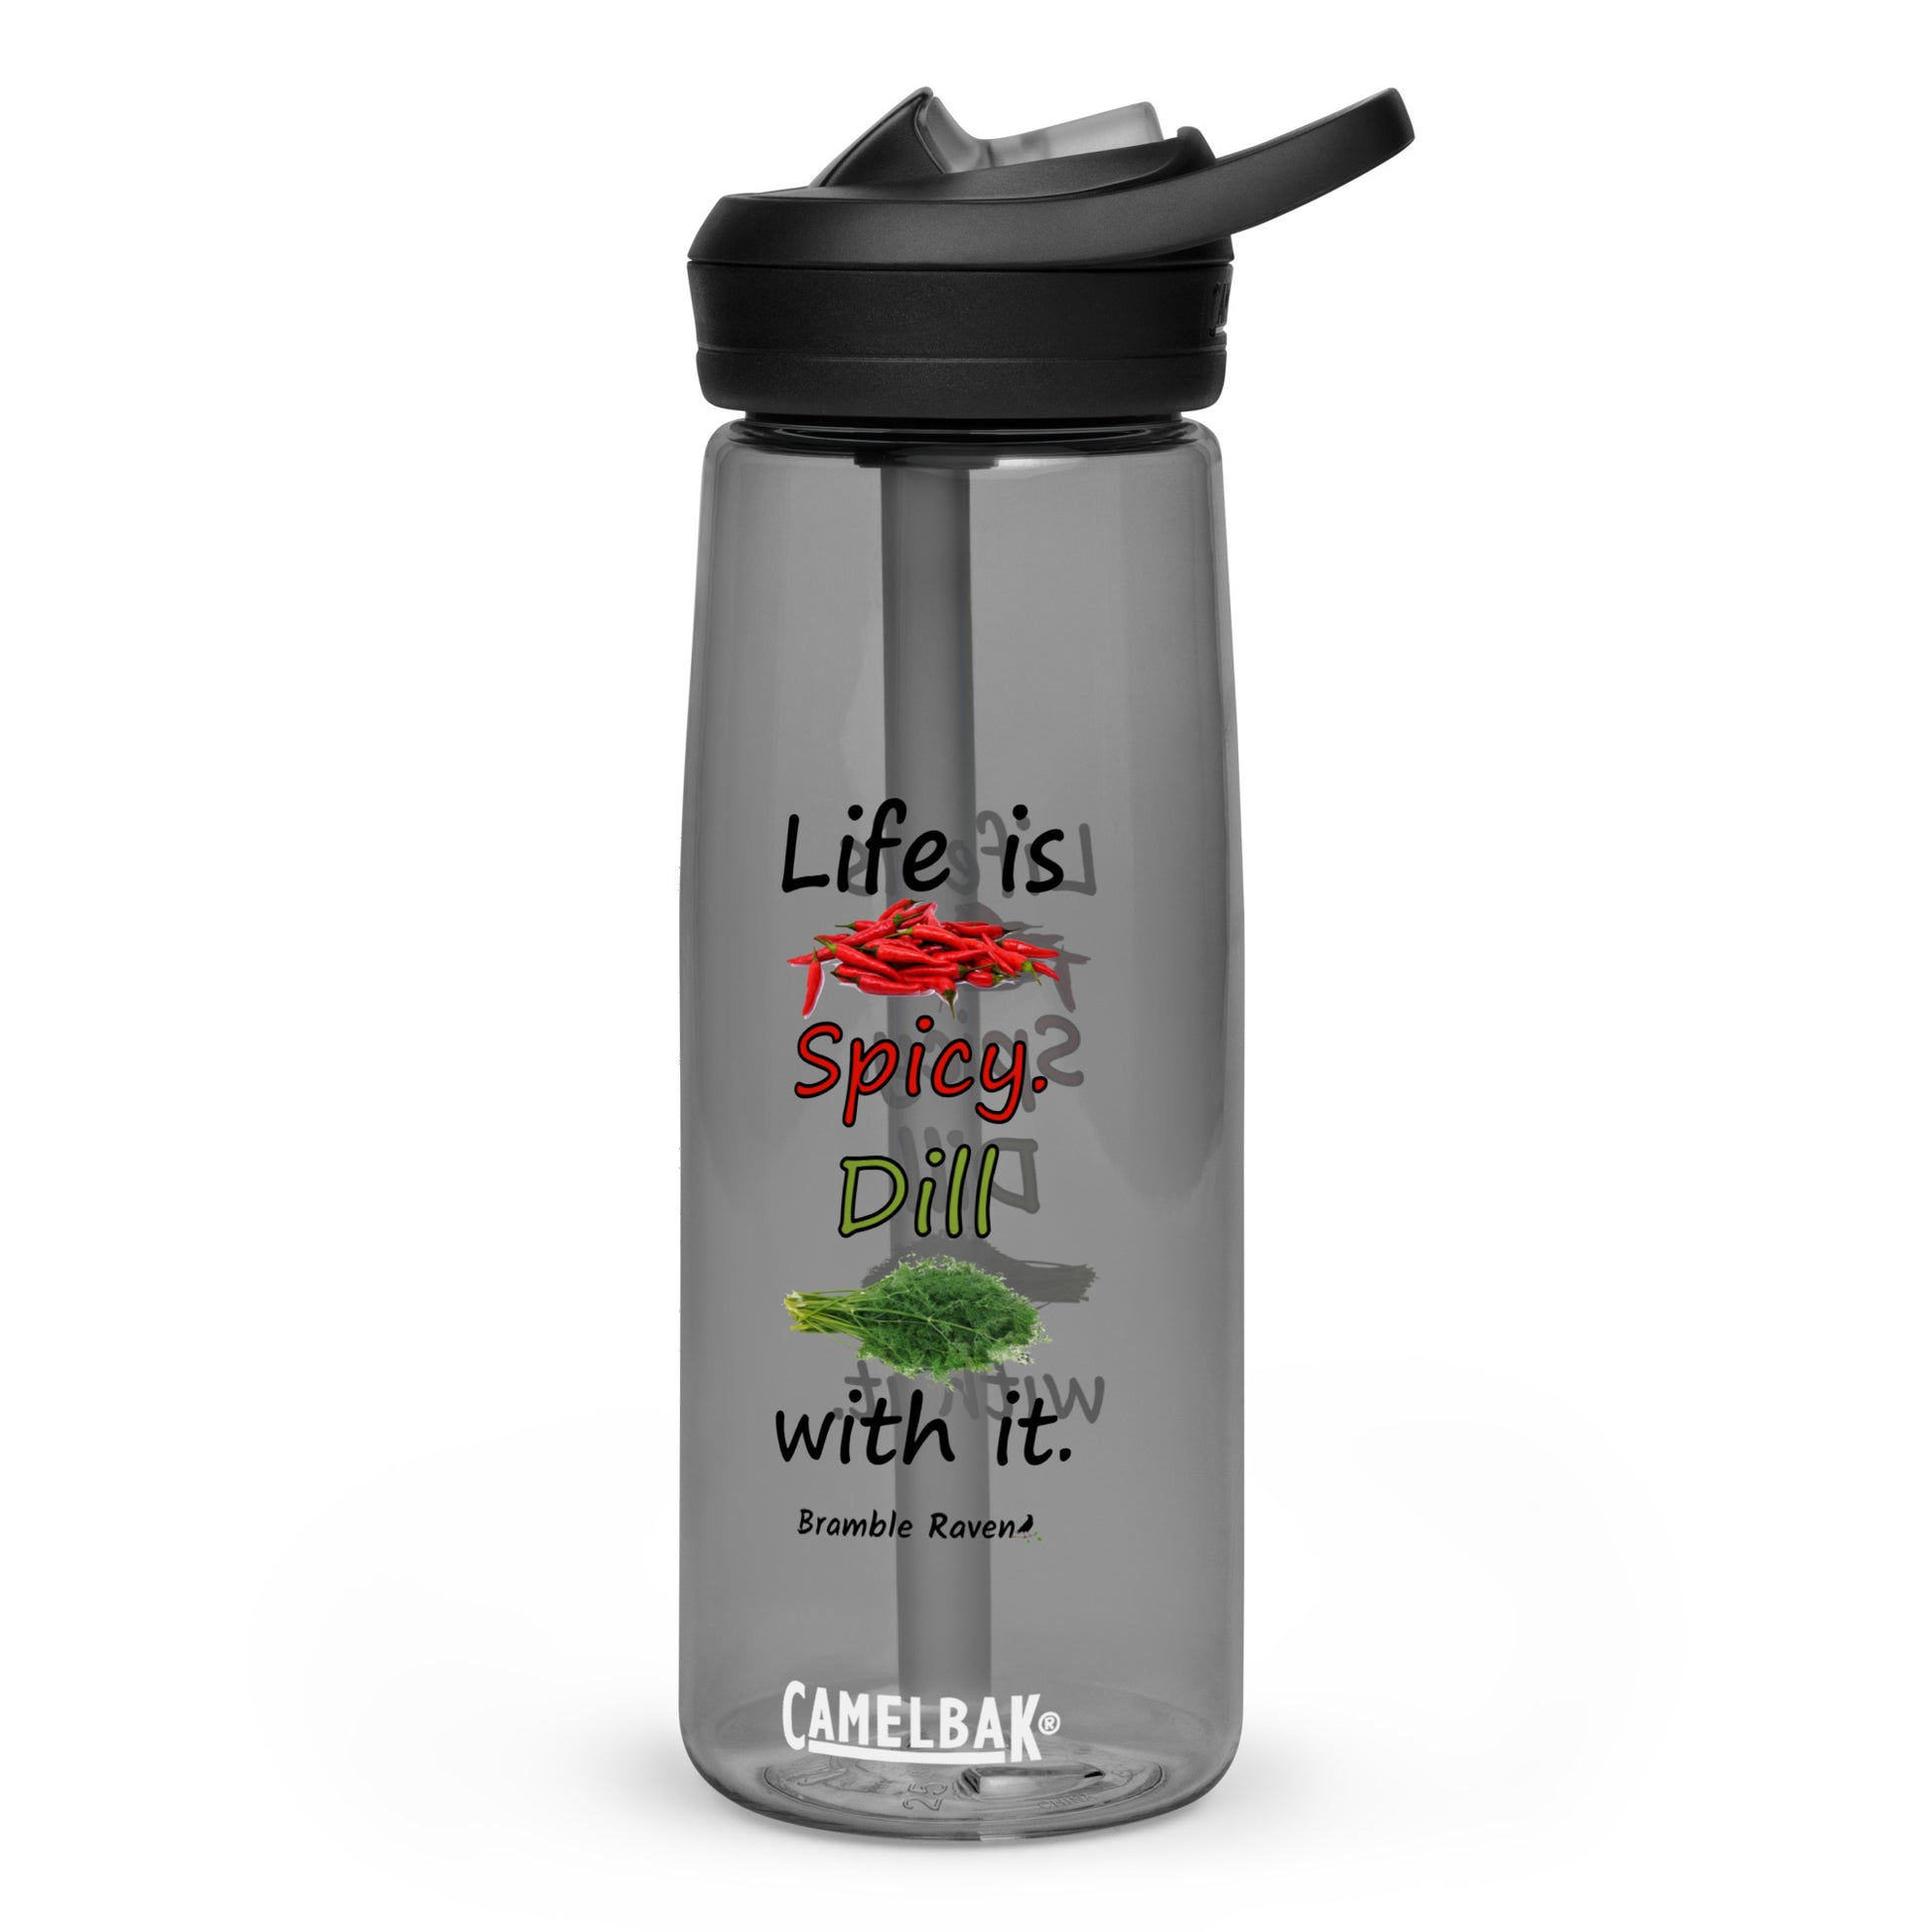 25 ounce sports water bottle with spill-proof lid and bite valve. Charcoal grey stain and odor-resistant BPA-free plastic. Features double-sided design of "Life is spicy. Dill with it" phrase with peppers and dill weed images.